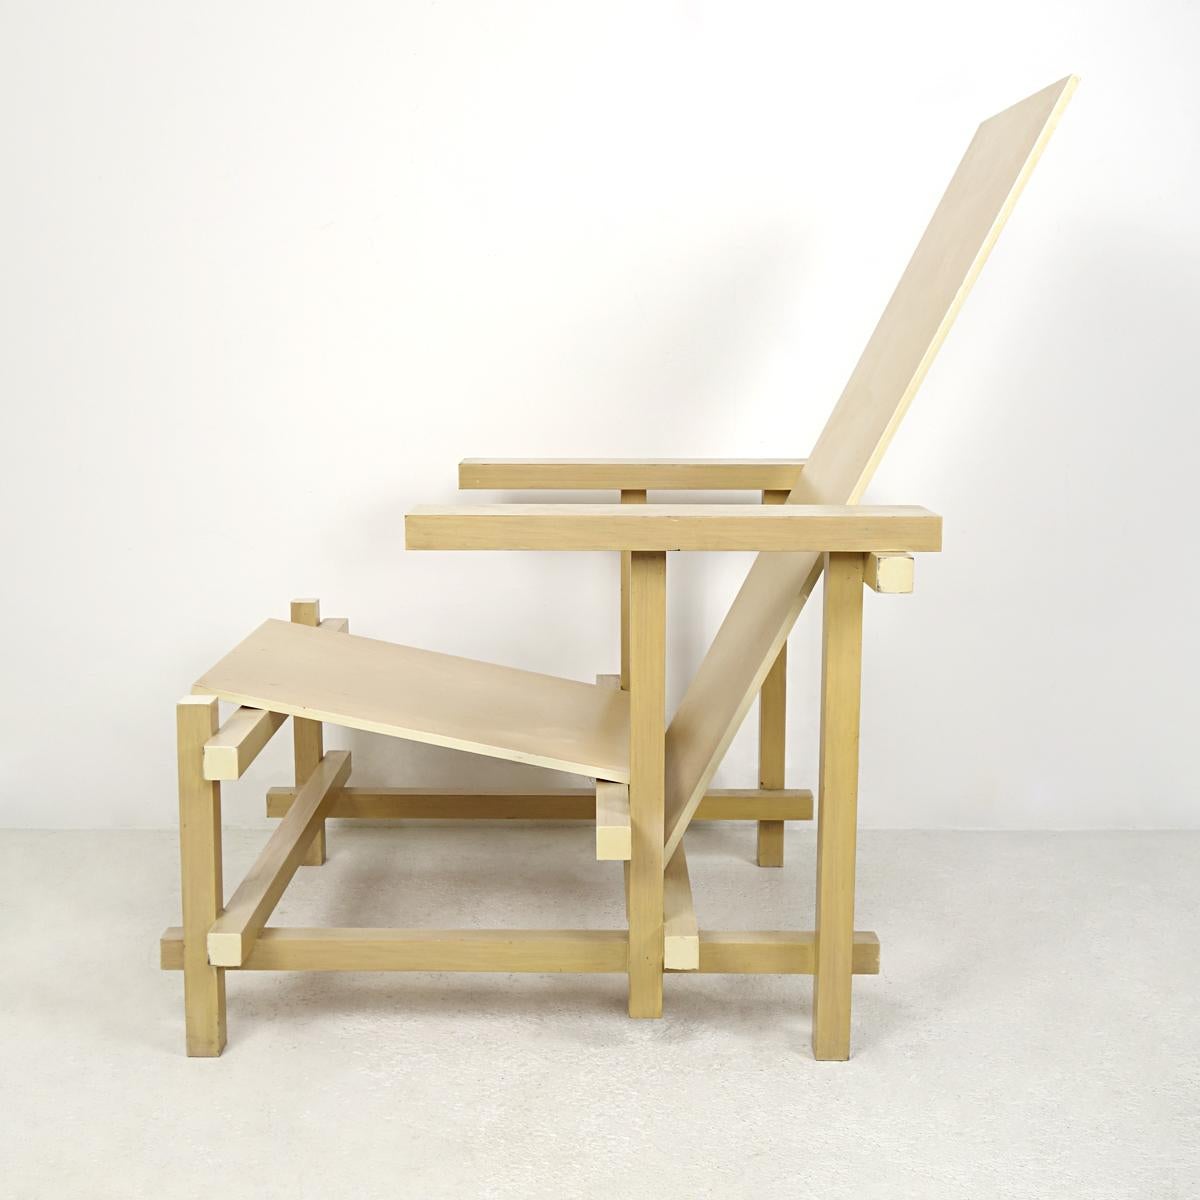 Dutch Modernist Chair Made of Uncolored Lacquered Wood after Gerrit Rietveld's Design